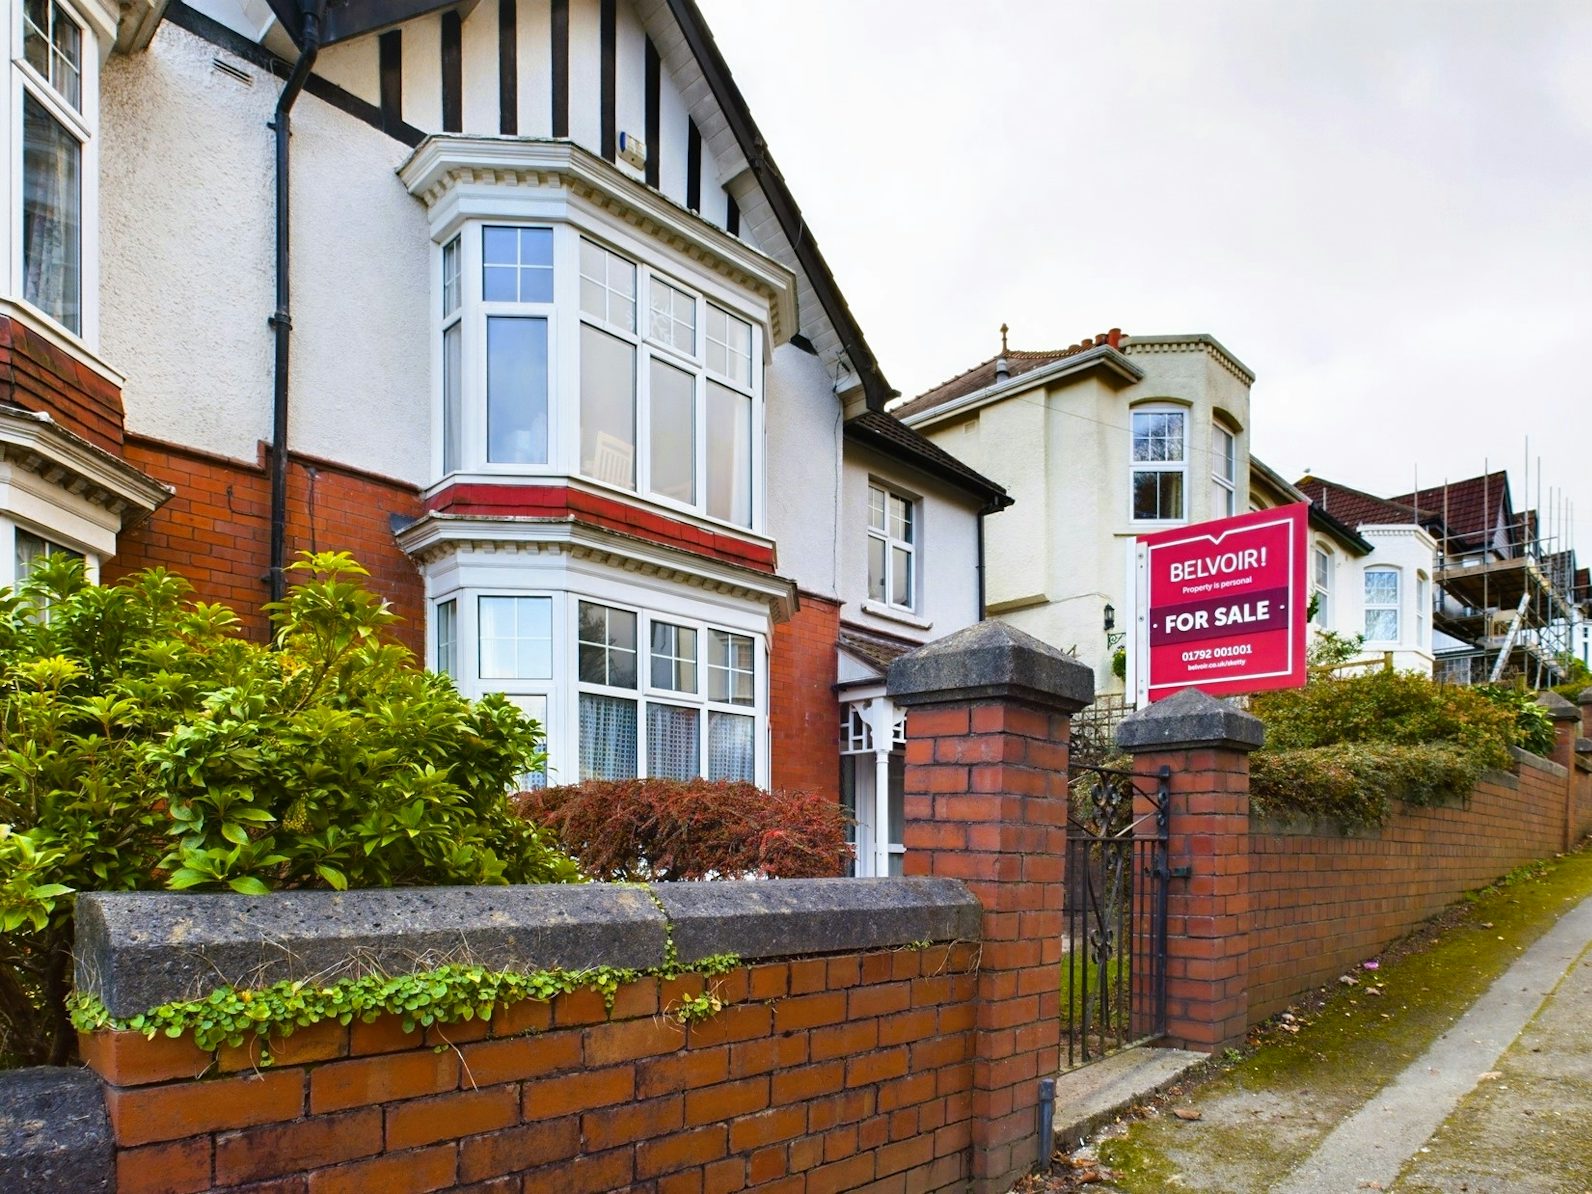 Flat for sale on Queens Road Sketty, Swansea, SA2